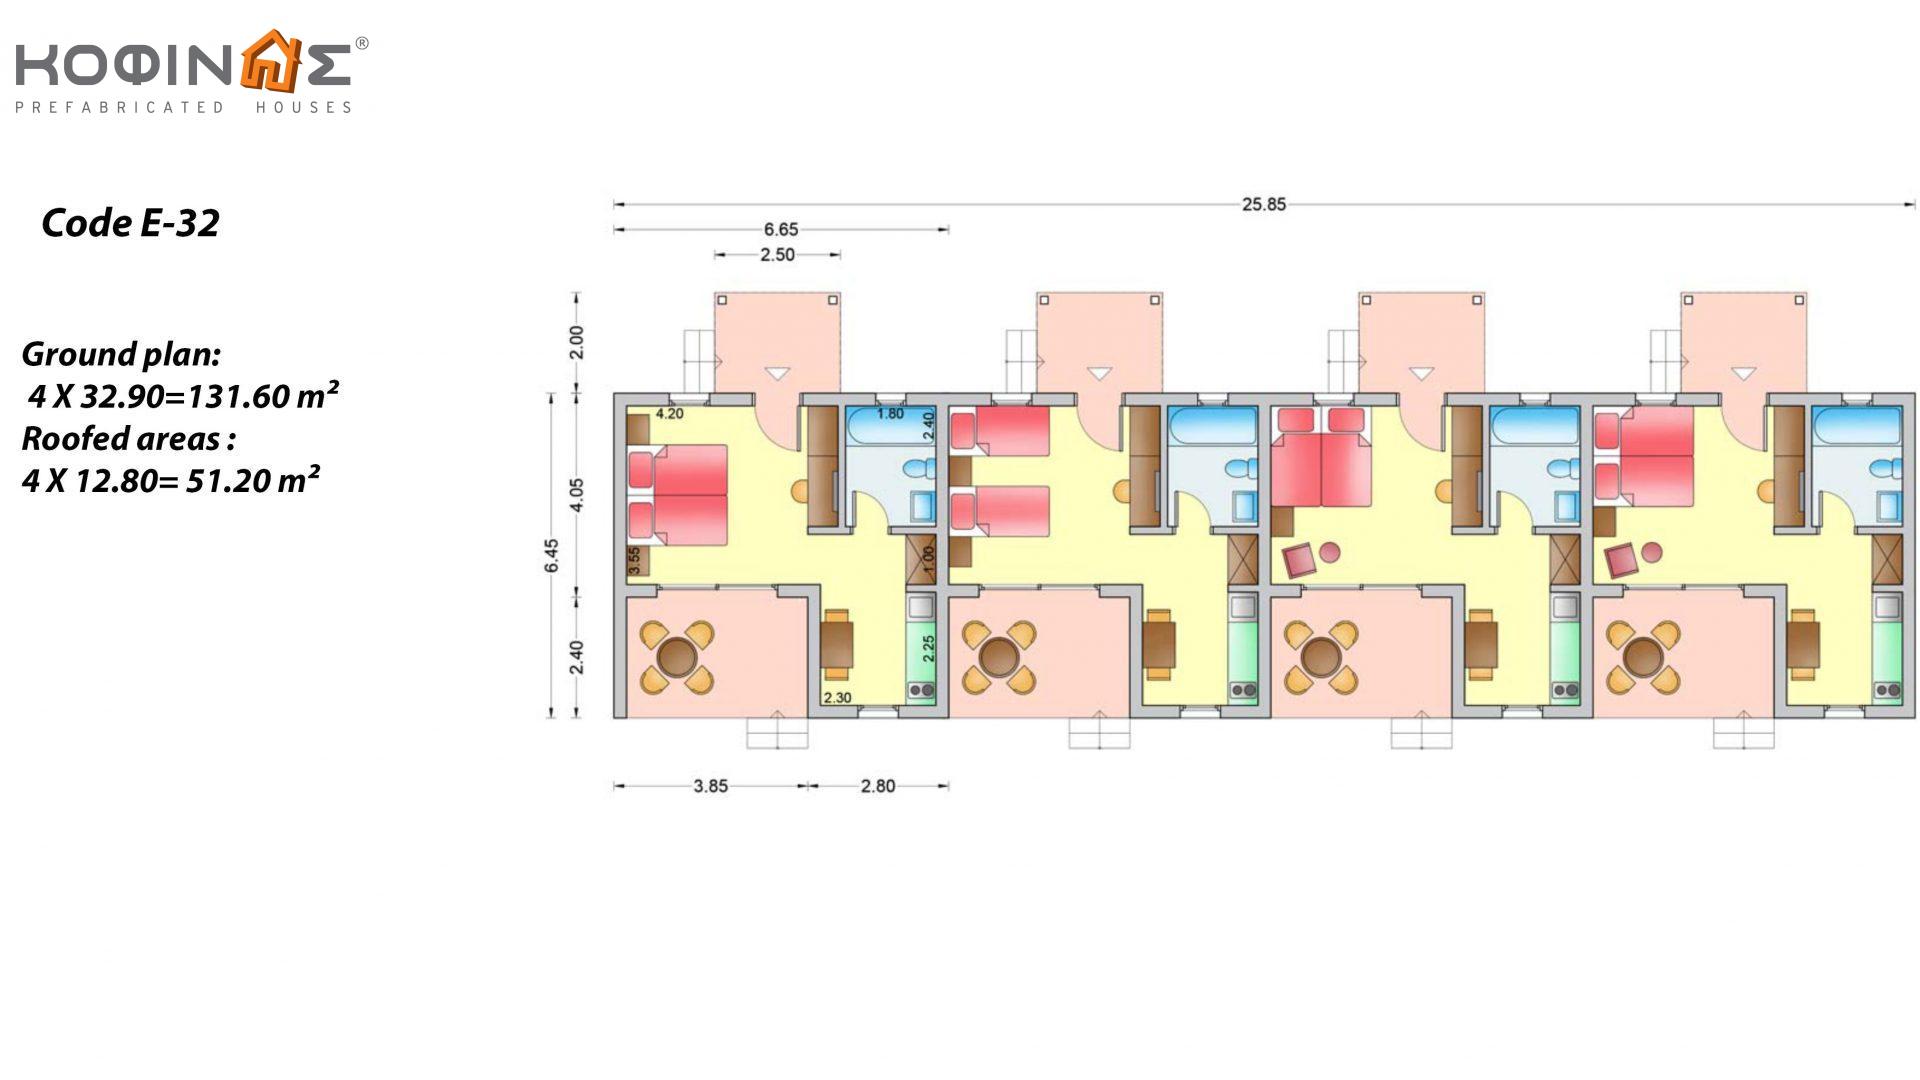 1 Storey Complex E-32, total surface of 4 x 32,90 = 131,60 m², covered areas 51.20 m²